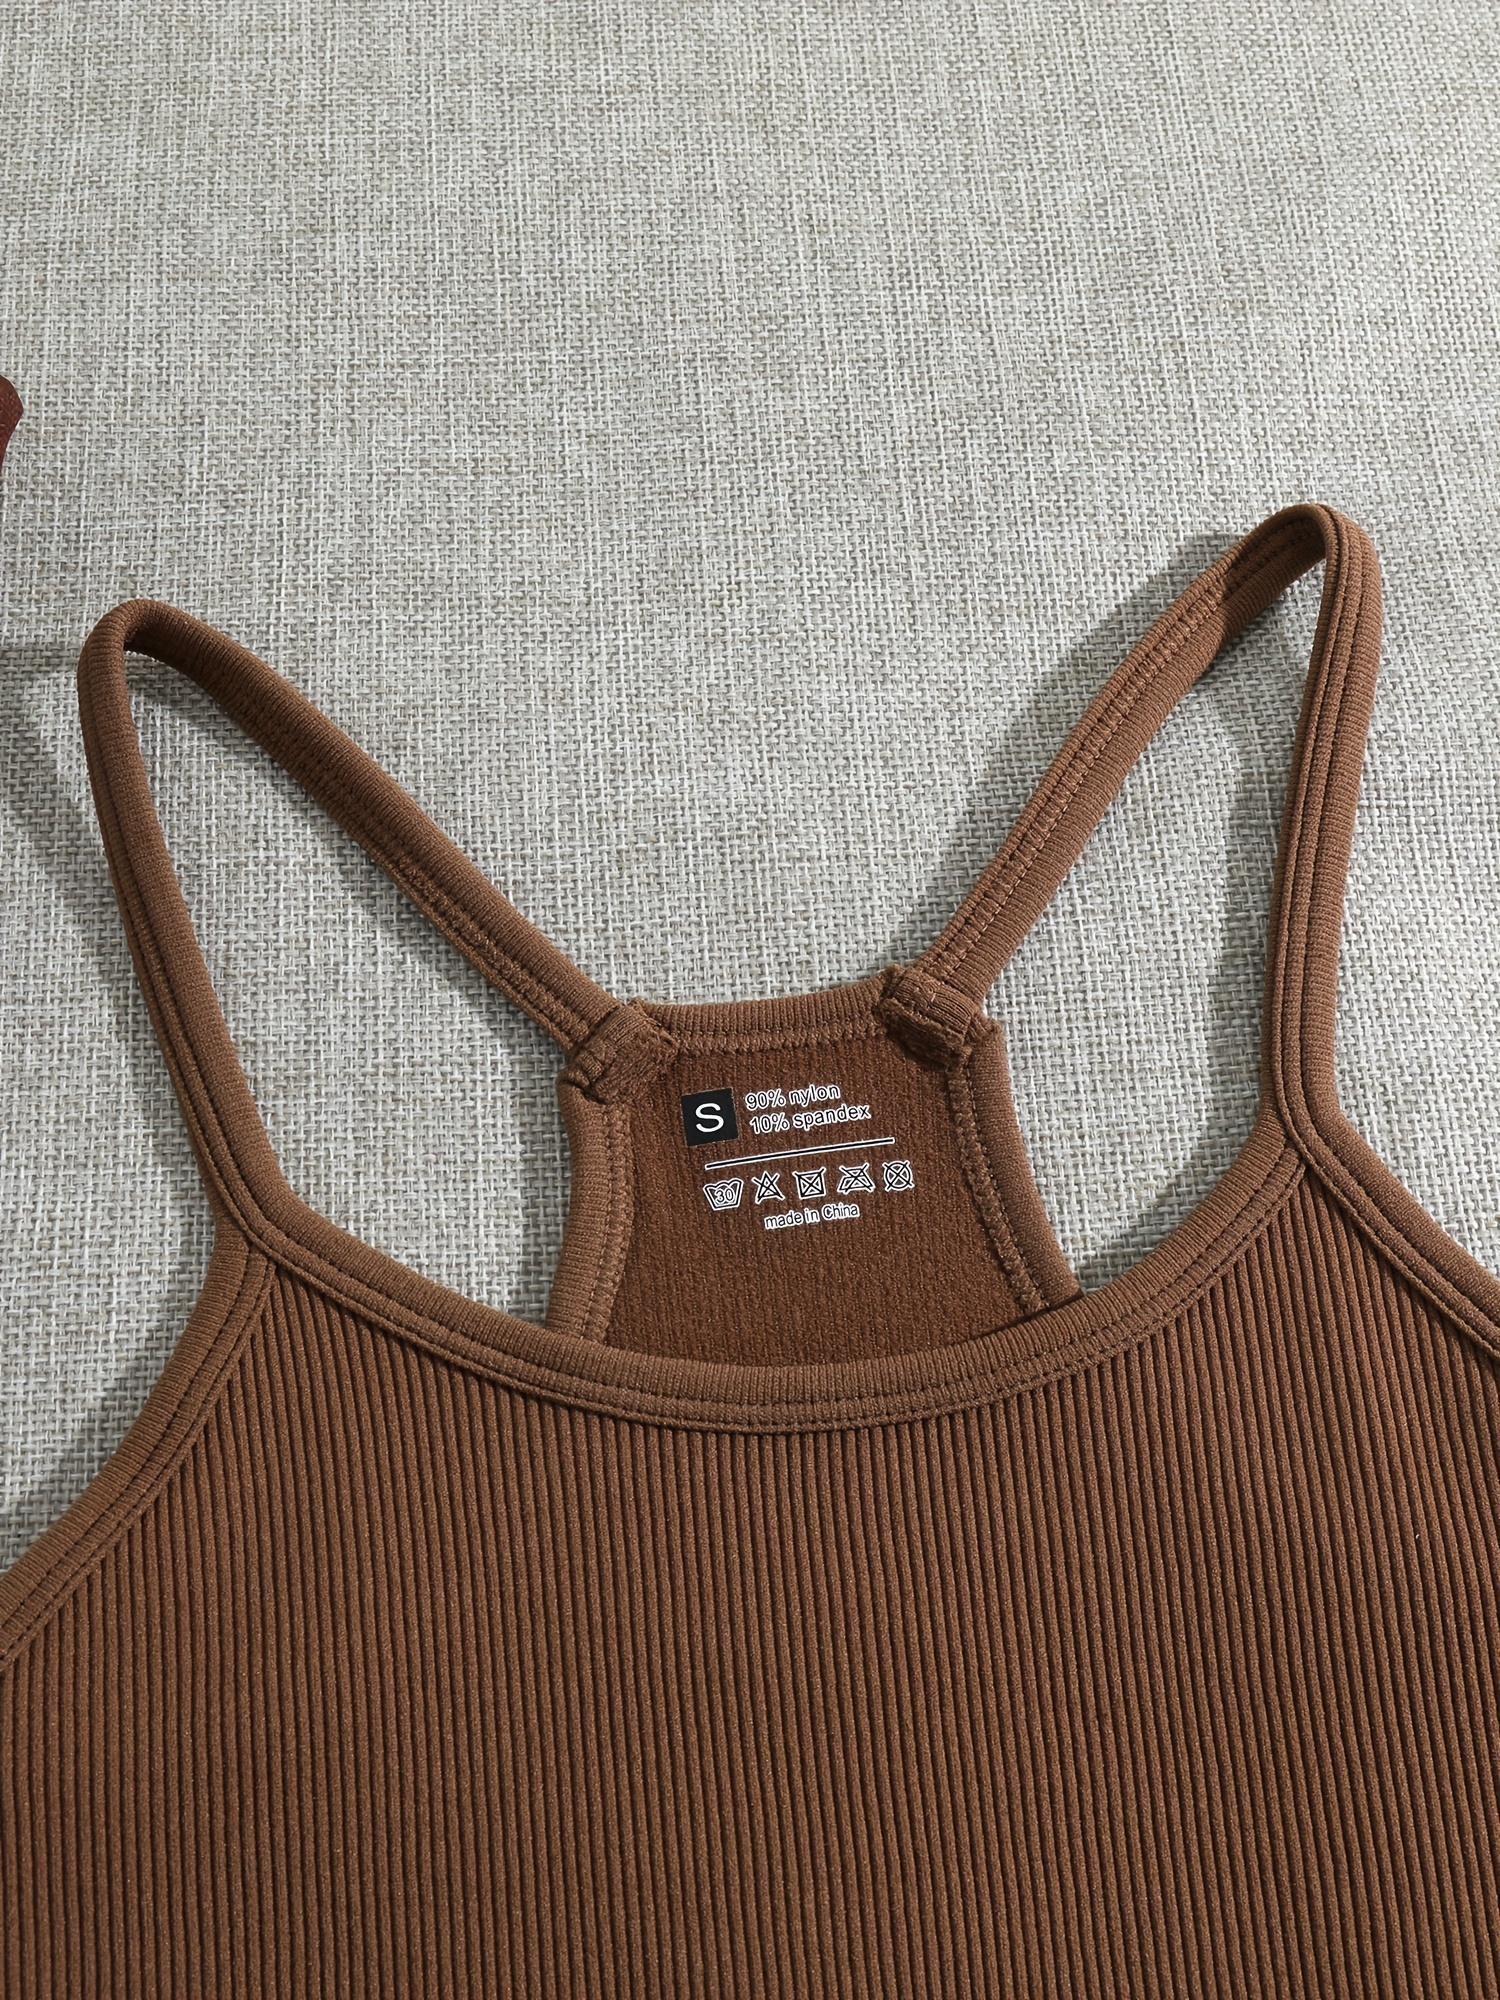  The Gym People: Sports Bra & Tank Tops